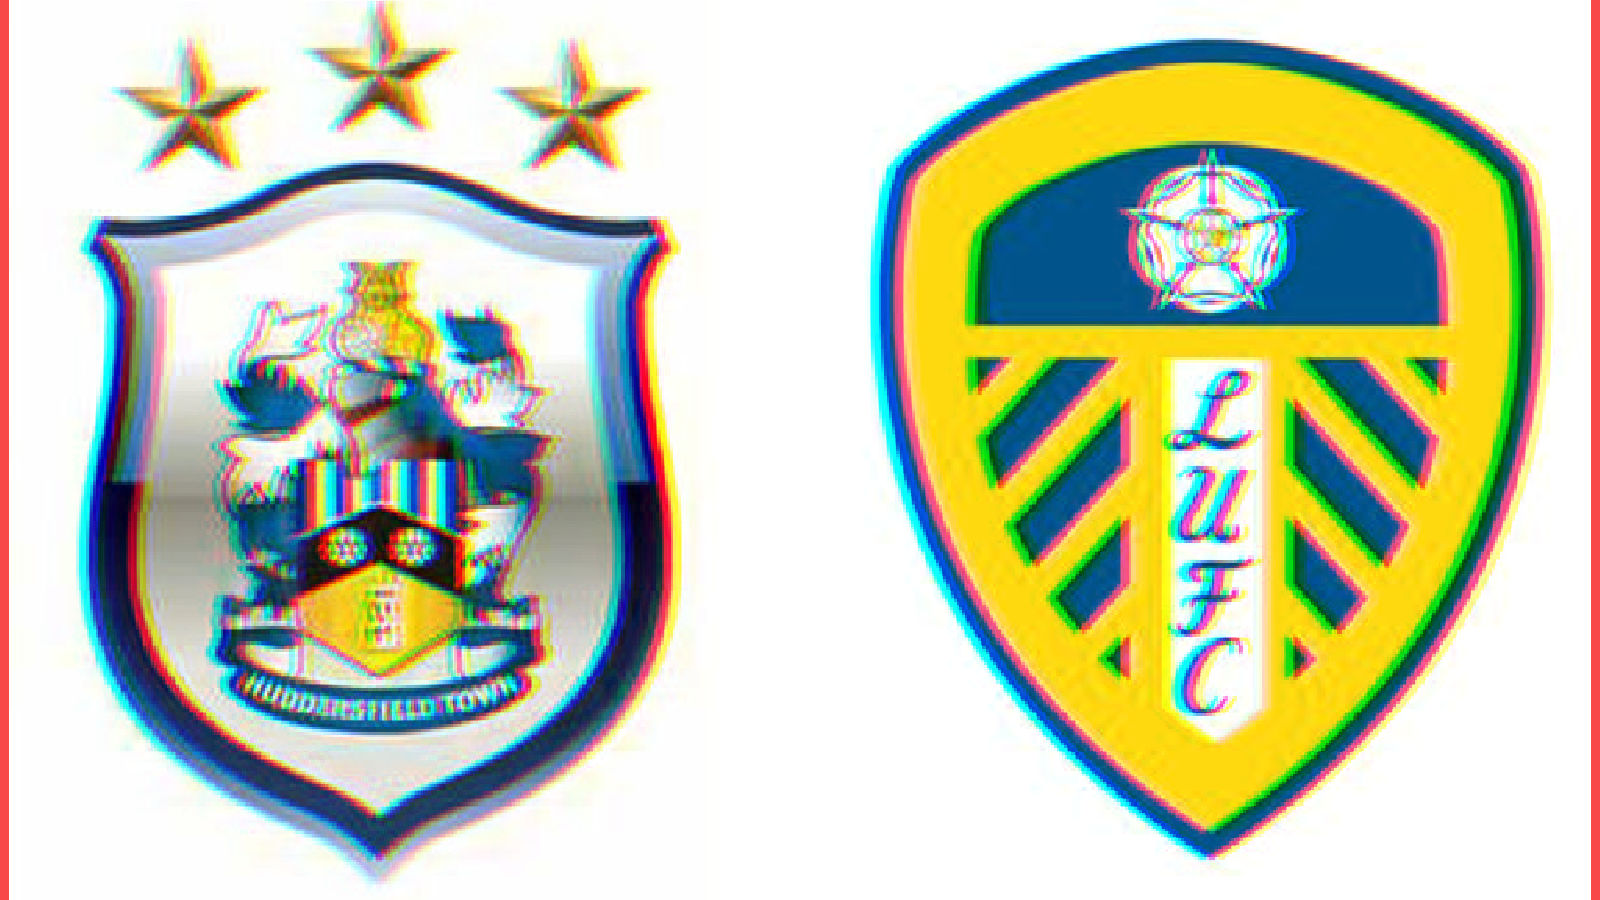 Huddersfield Town and Leeds United logos